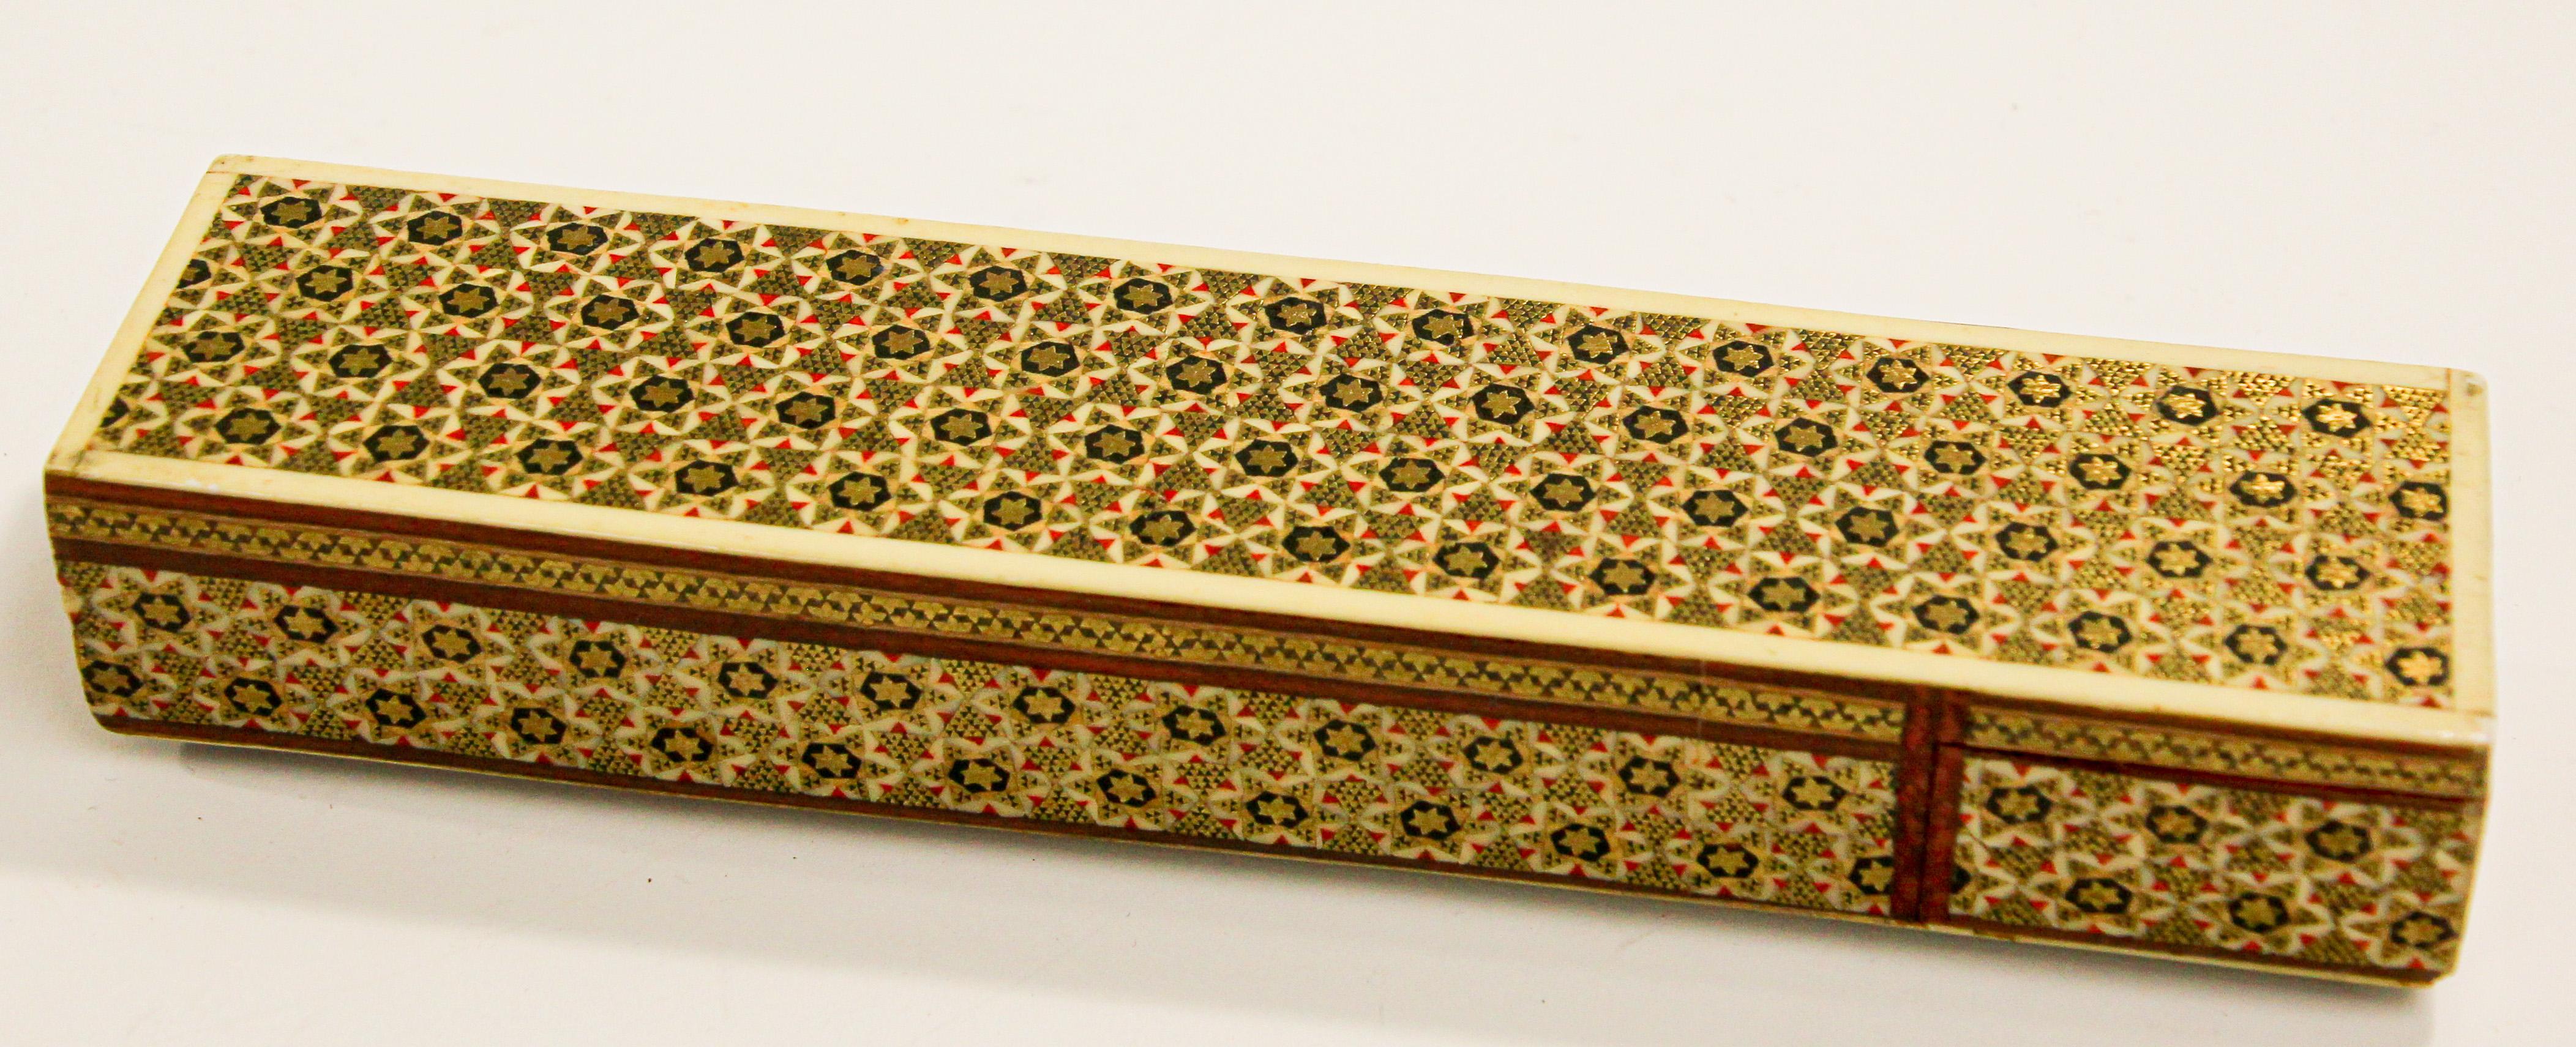 Hand-Painted Persian Lacquer Pen Box Hand Painted with Floral Design For Sale